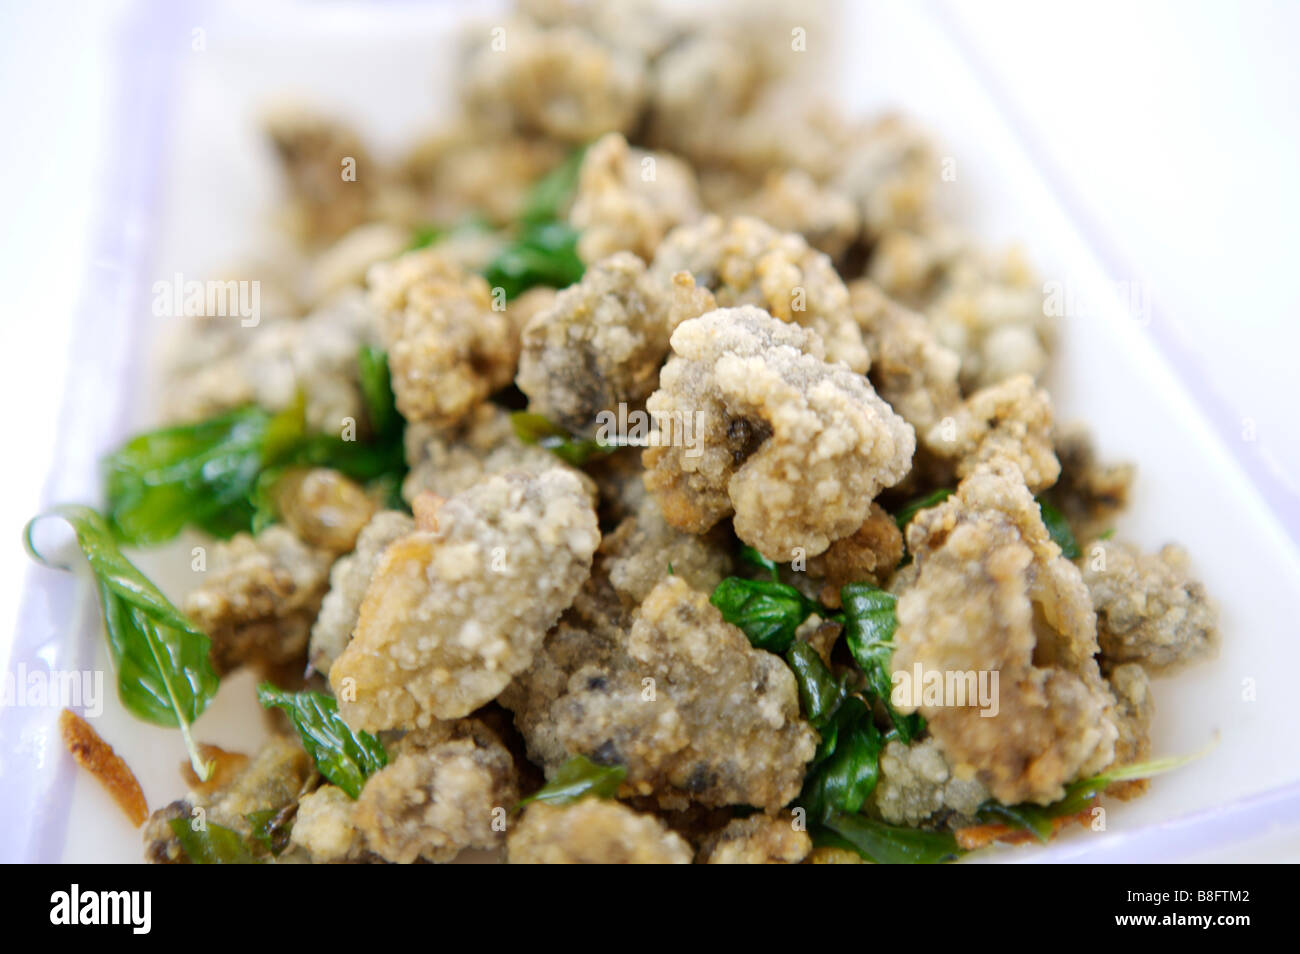 Close up of fried oyster Stock Photo